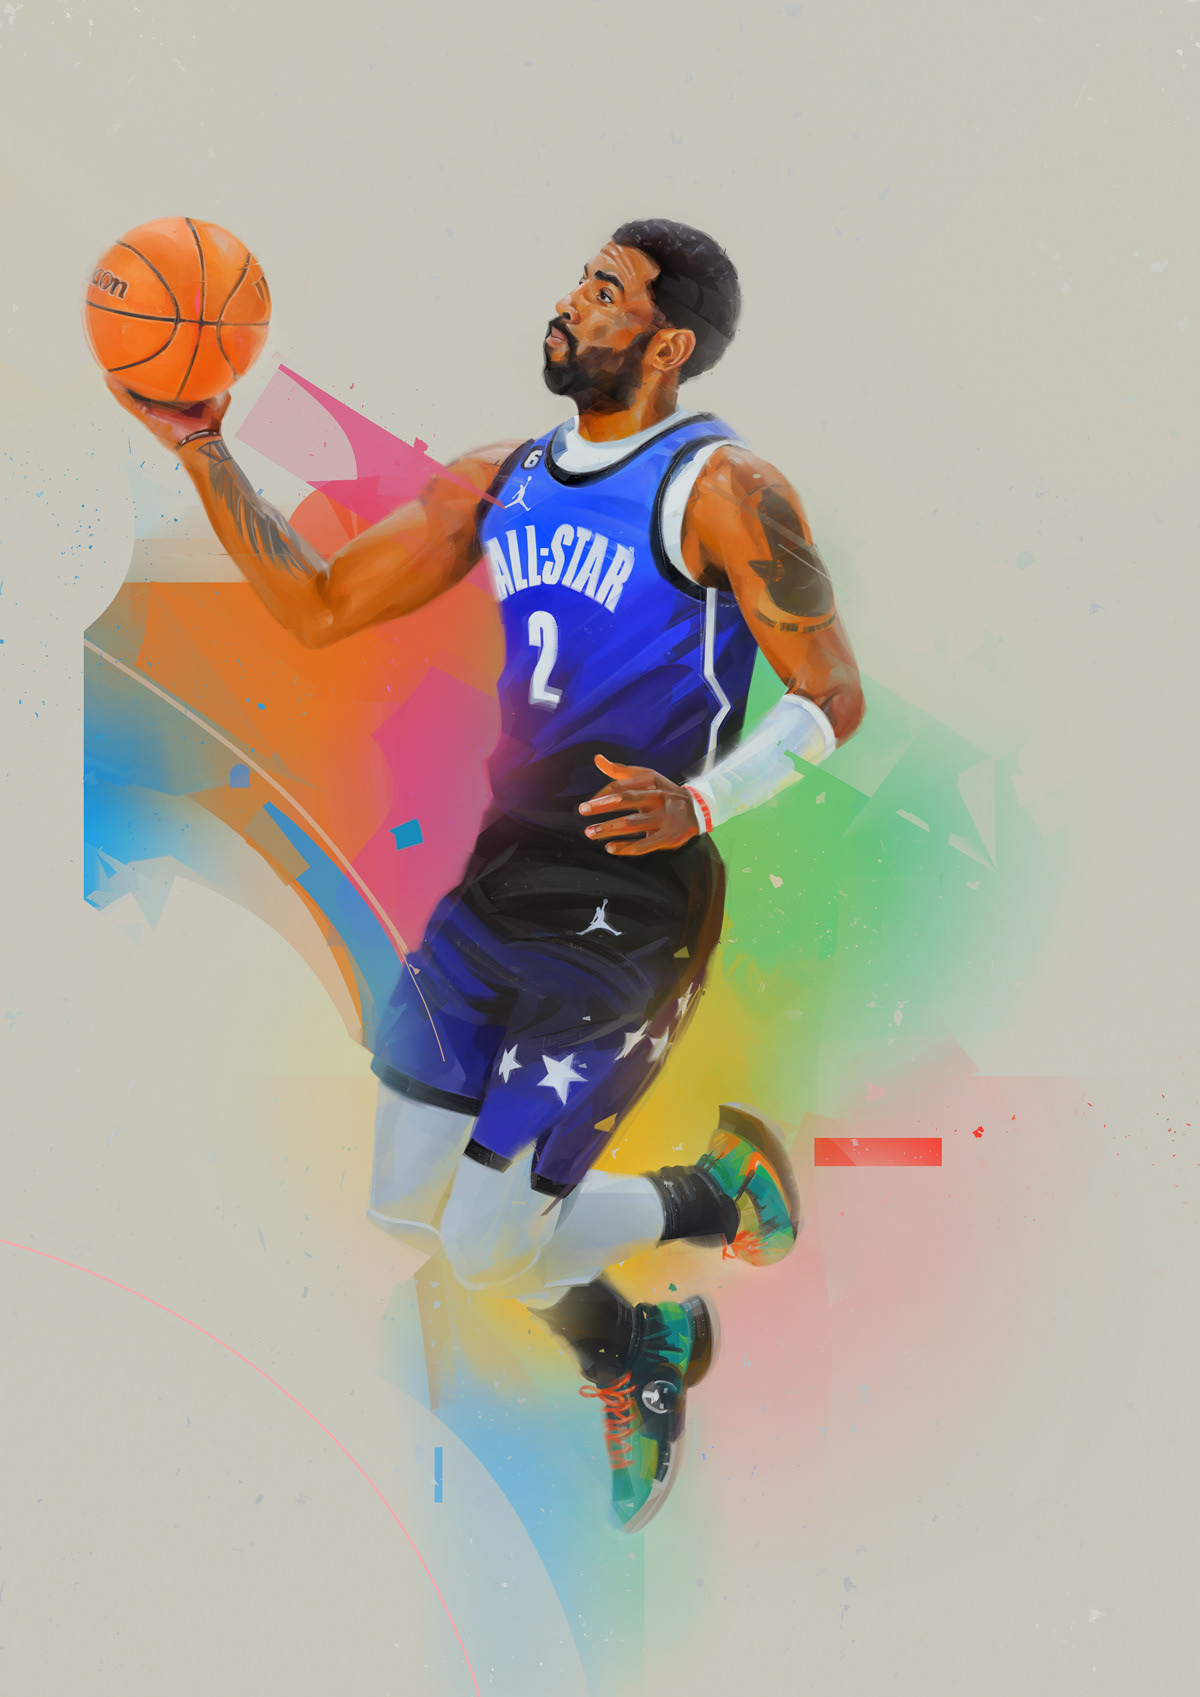 all star game basketball colorful Dynamic NBA Nike portrait sports game poster